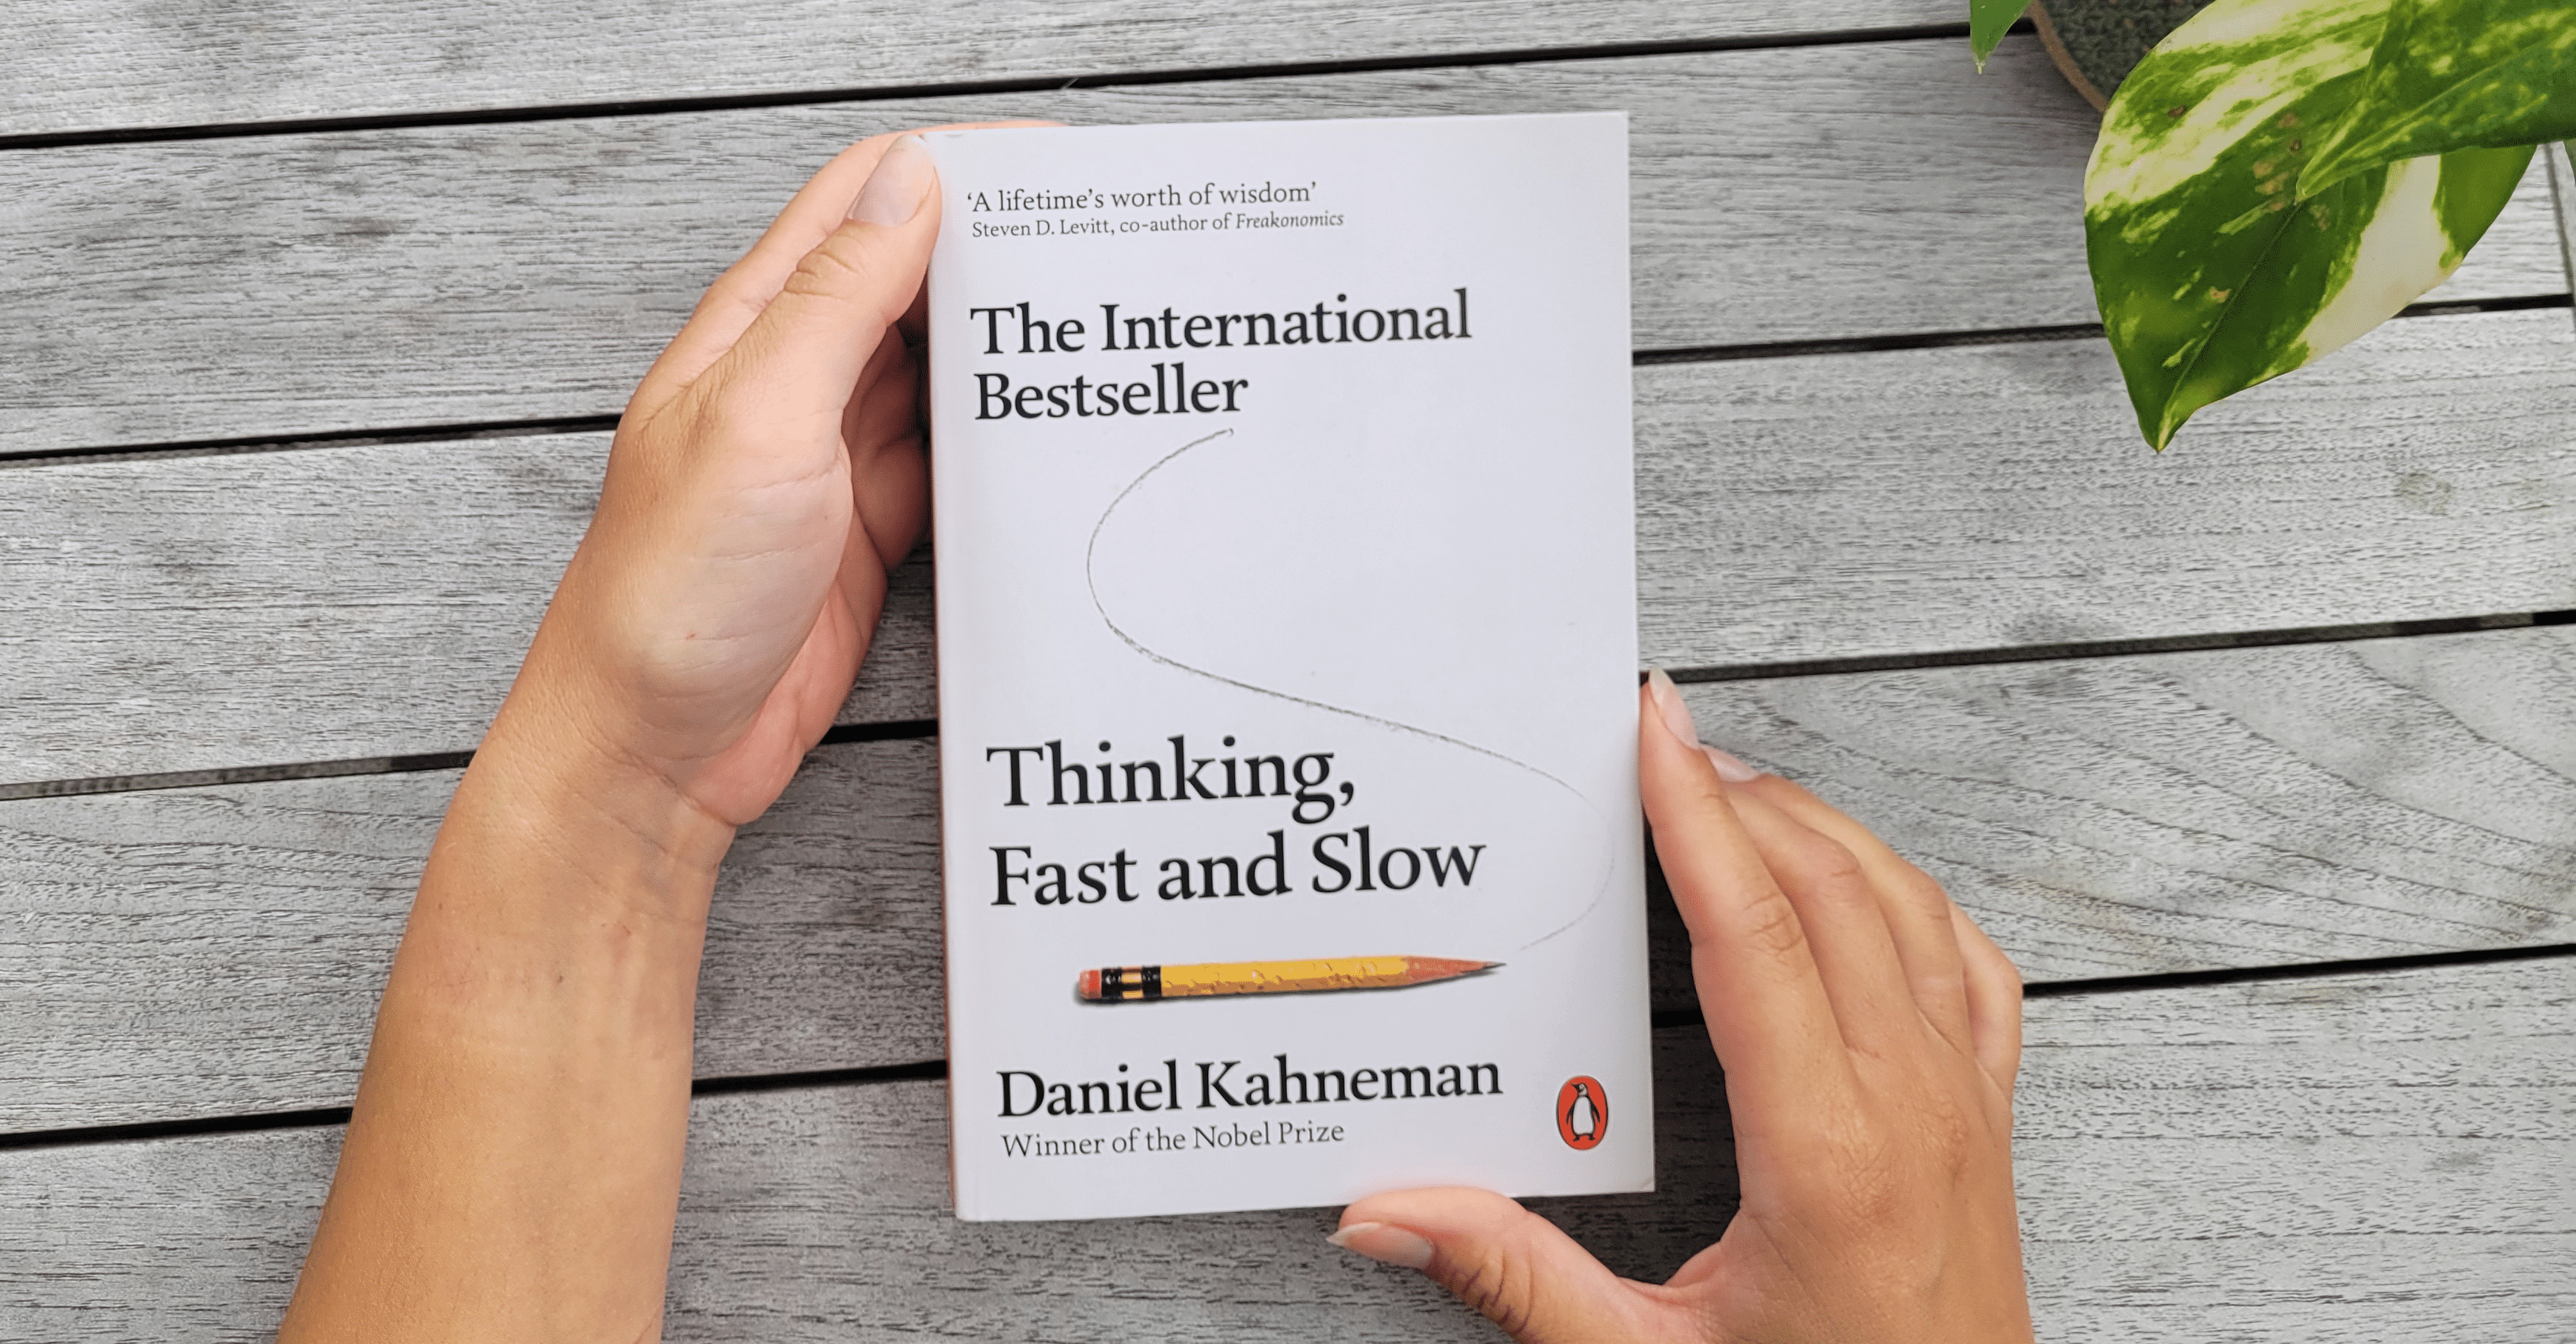 INTERNATIONAL　KAHNEMAN　BY　THE　THE　BESTSELLER　SLOW　NOBEL　PRIZE　THINKING,　FAST　AND　WINNER　DANIEL　OF　Lazada　PH